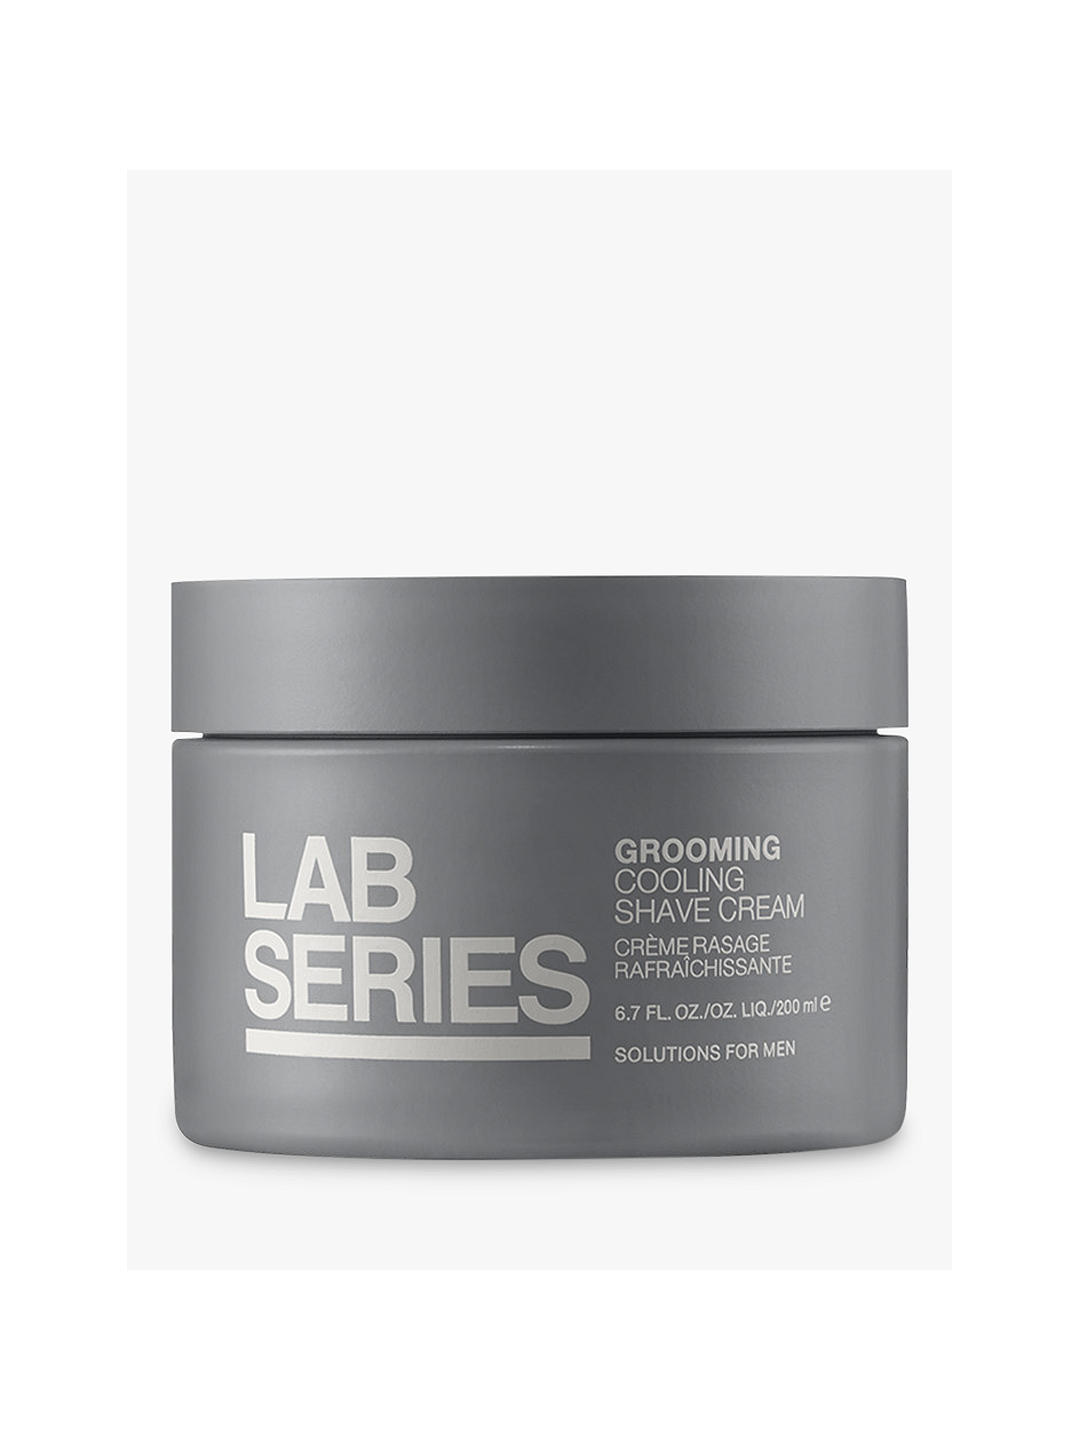 Lab Series Grooming Cooling Shave Cream, 200ml 1